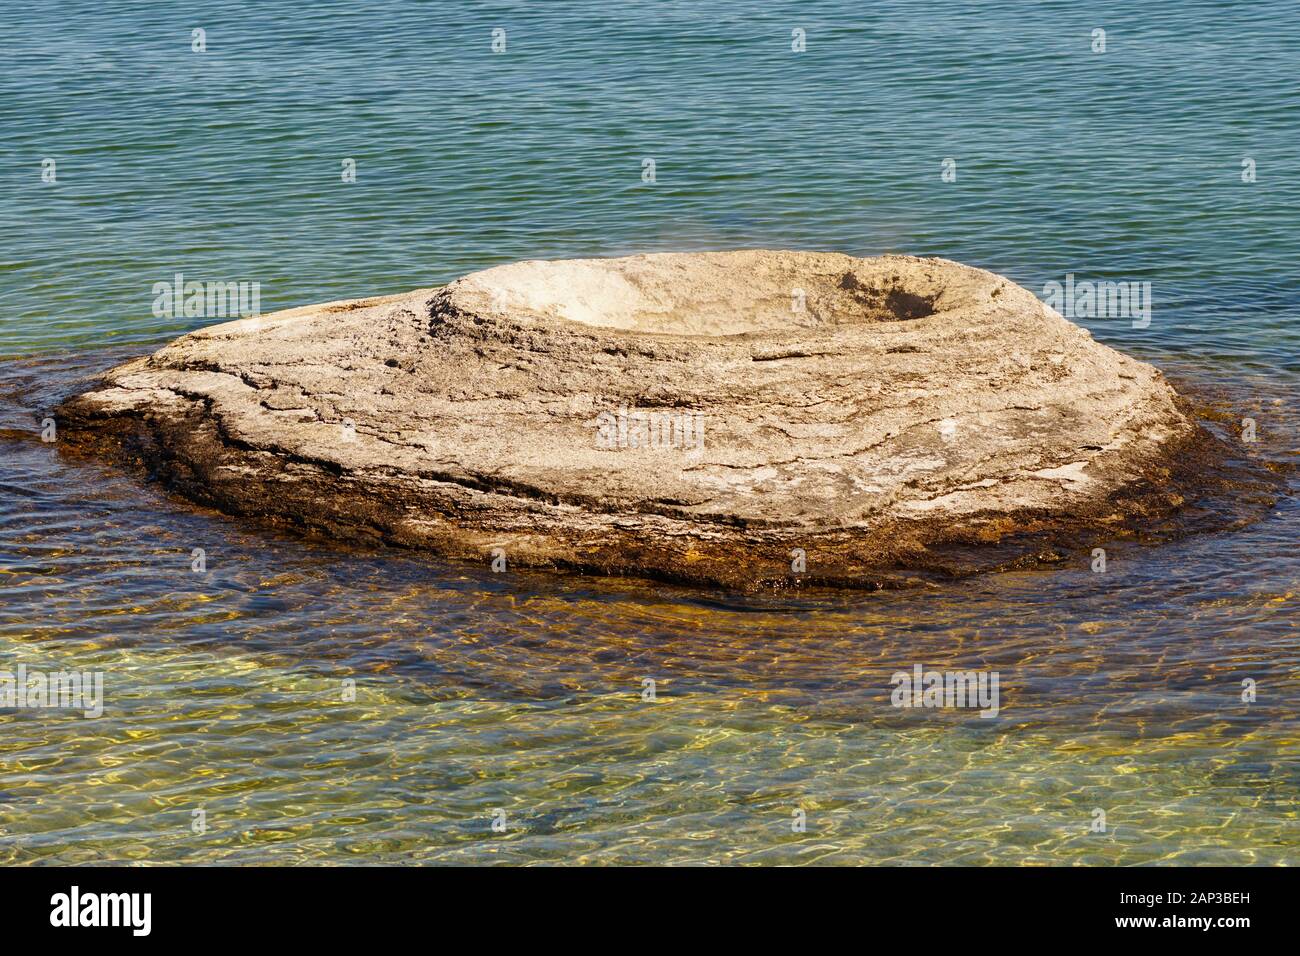 Steam comes from a thermal mud pot in the shallows of Yellowstone Lake in Yellowstone National Park Stock Photo